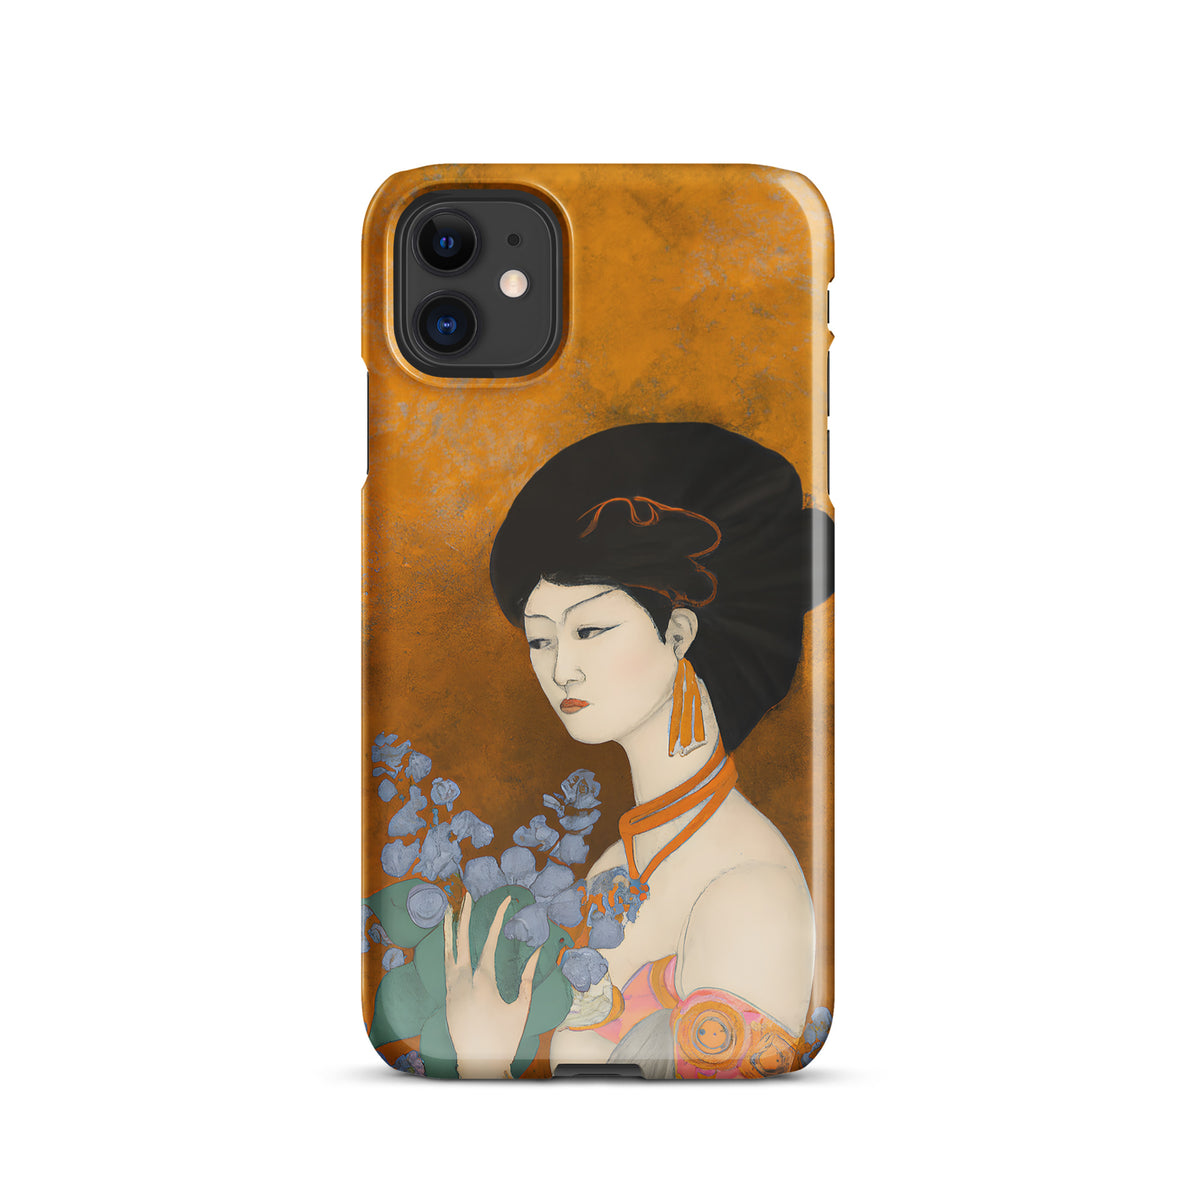 iPhone case with a painted image of a Geisha holding some violets 